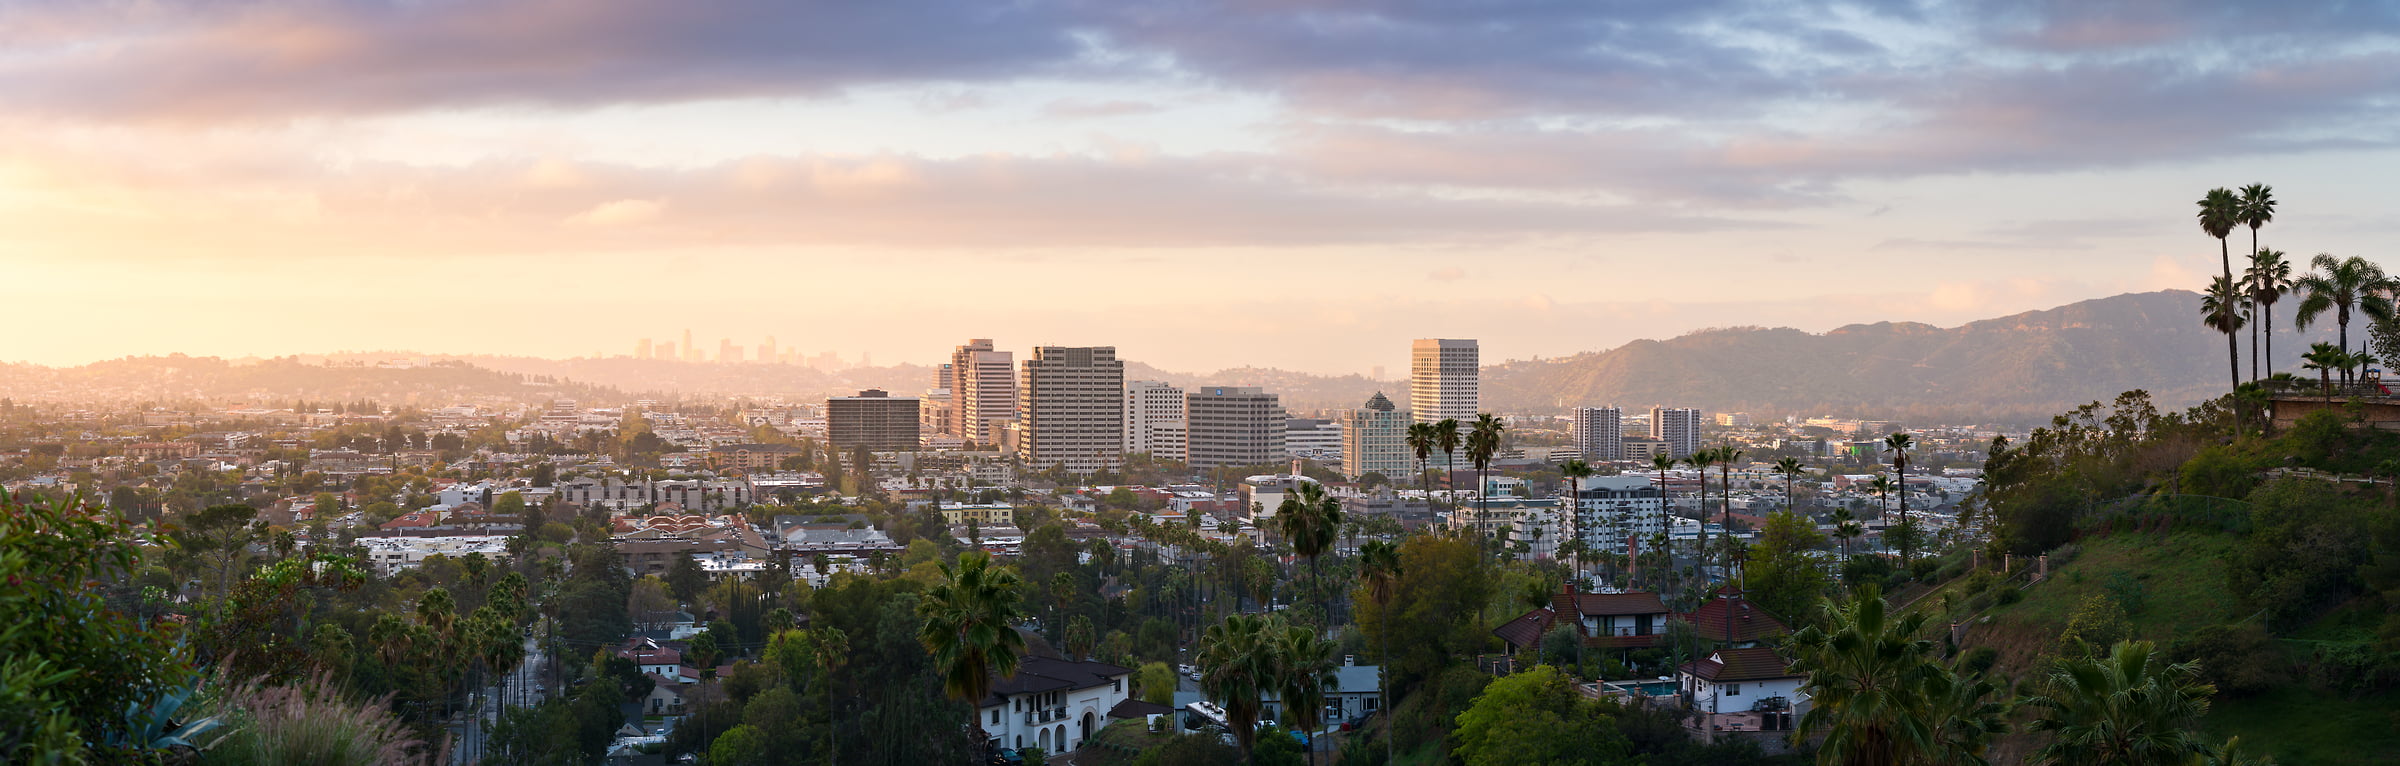 322 megapixels! A very high resolution, large-format VAST photo print of Glendale, California at sunrise; cityscape photograph created by Jeff Lewis in Glendale, California.